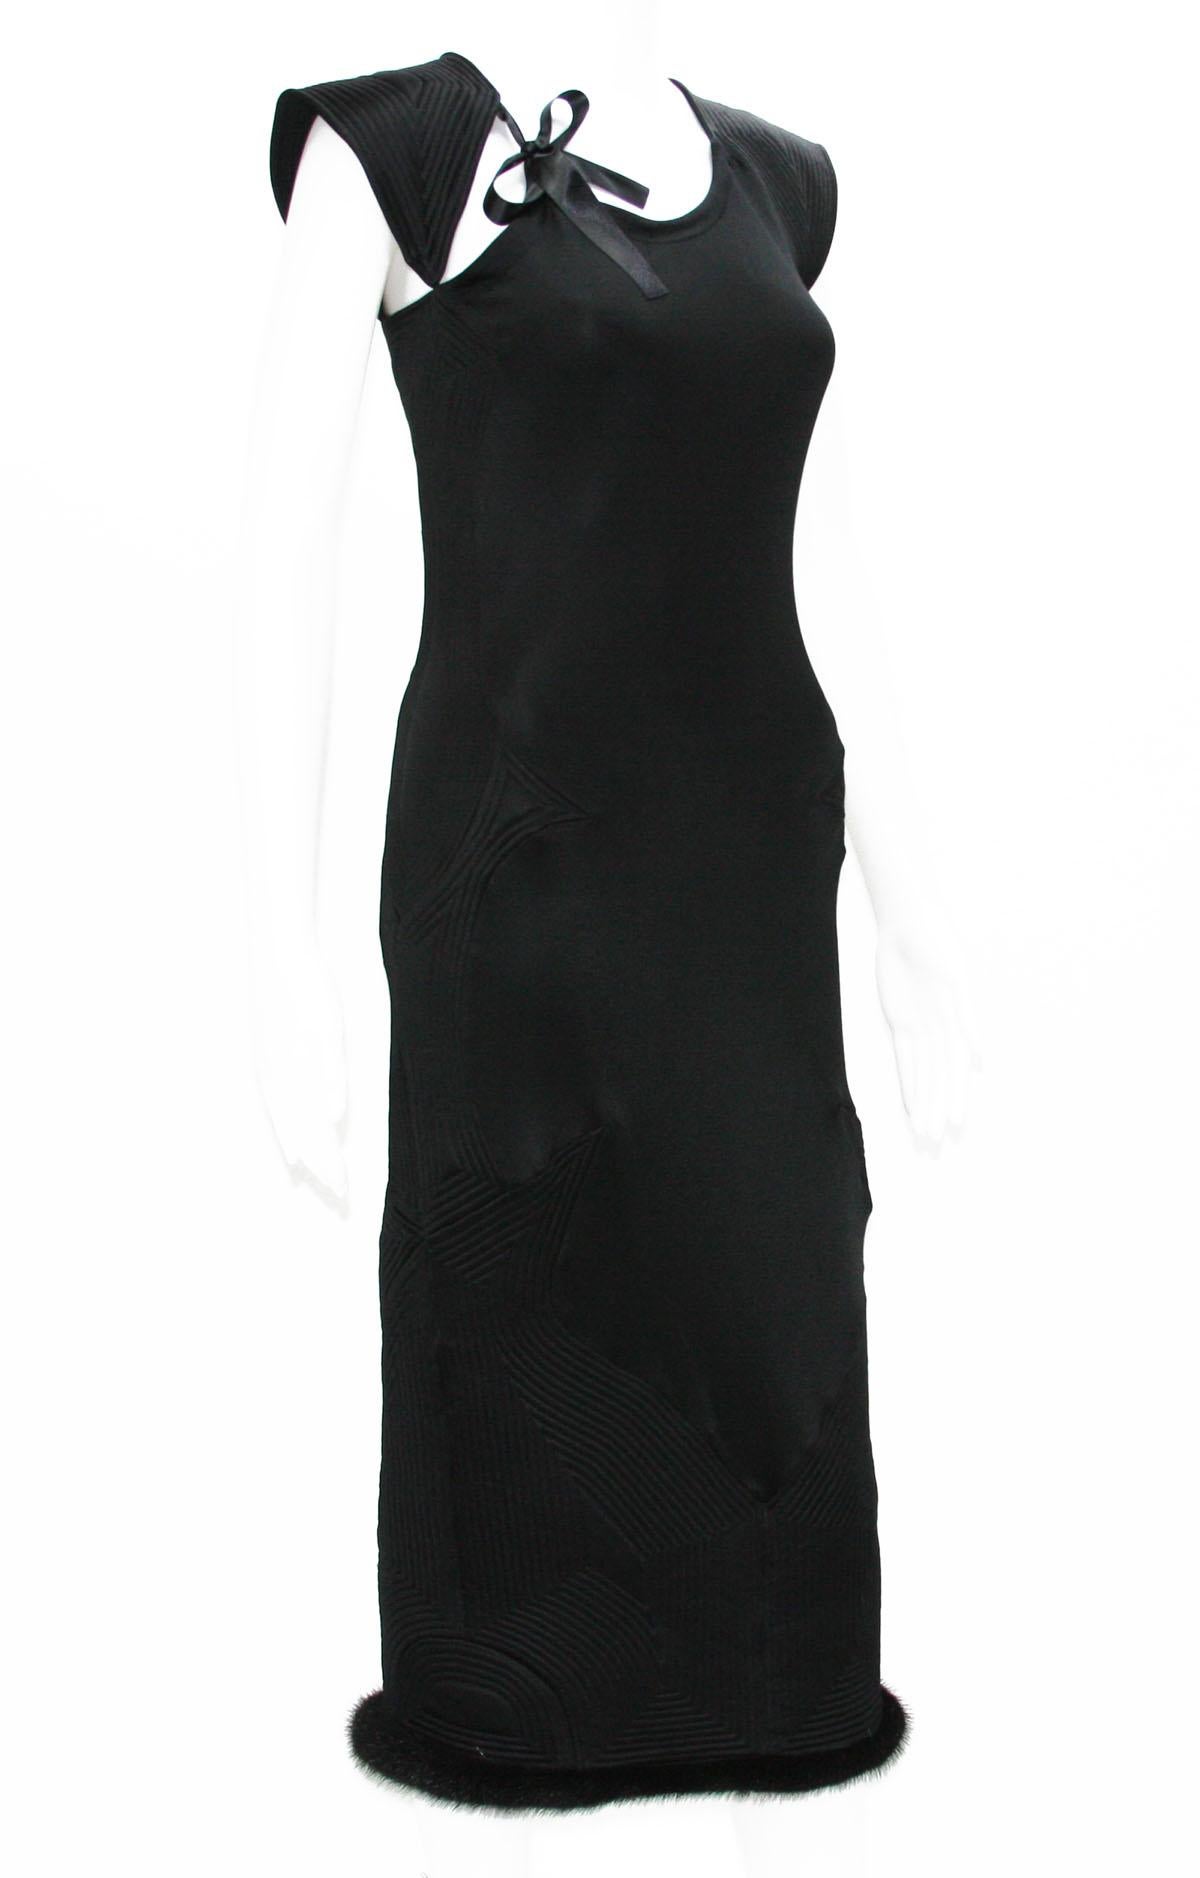 Collectible TOM FORD for YVES SAINT LAURENT Black Stretch Dress
Designer Sizes available - M and XS
Fall/Winter 2004 Collection
Color – Black
Rib Detail Throughout, Bow Accent at Neckline, Mink Fur Trim at Hemline, Zip Closure on Side, Fabric is